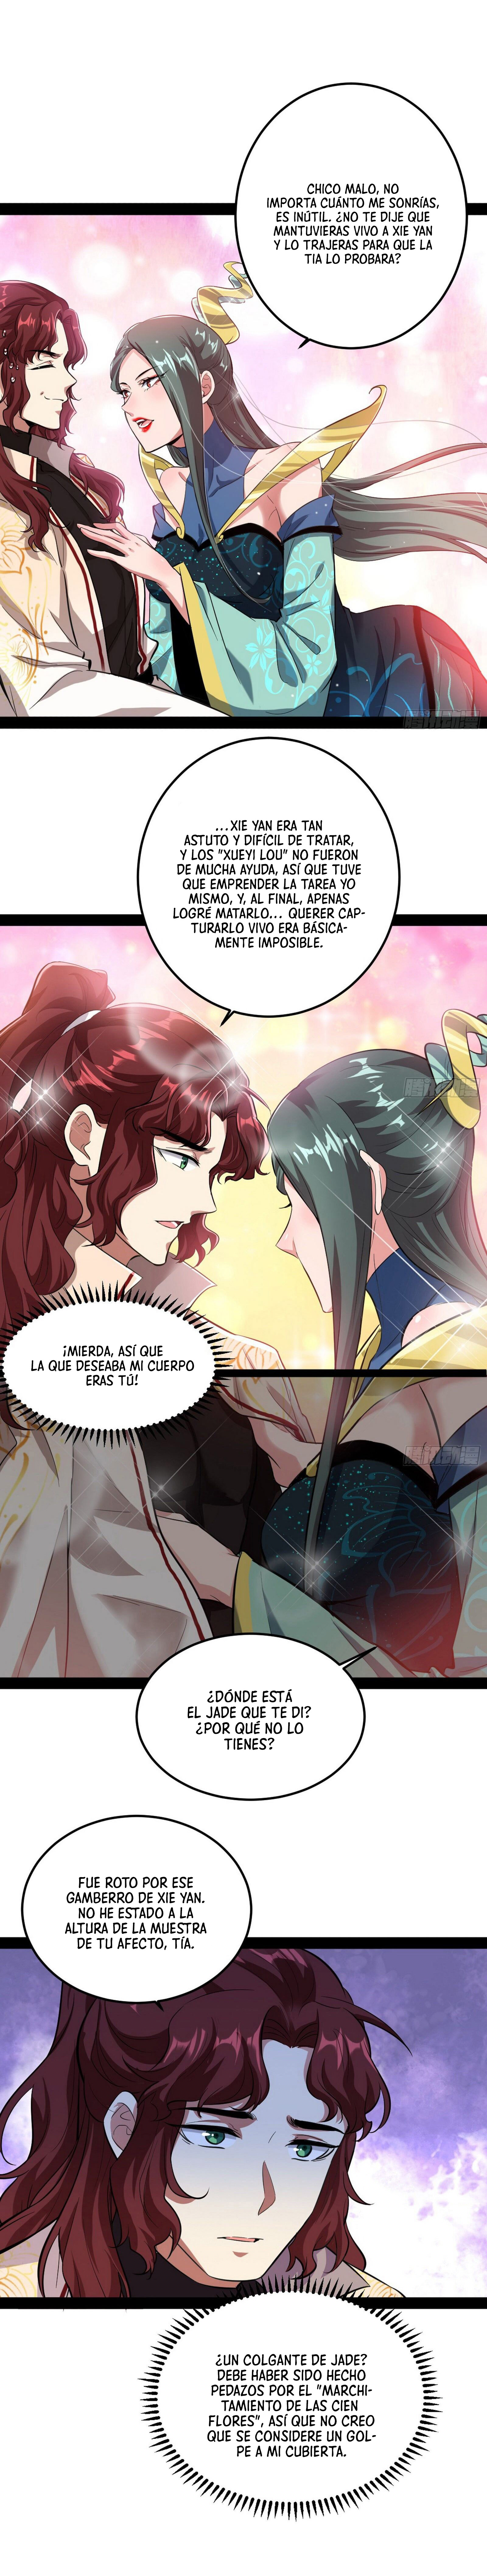 Manga Soy un dios maligno Chapter 93 image number 22